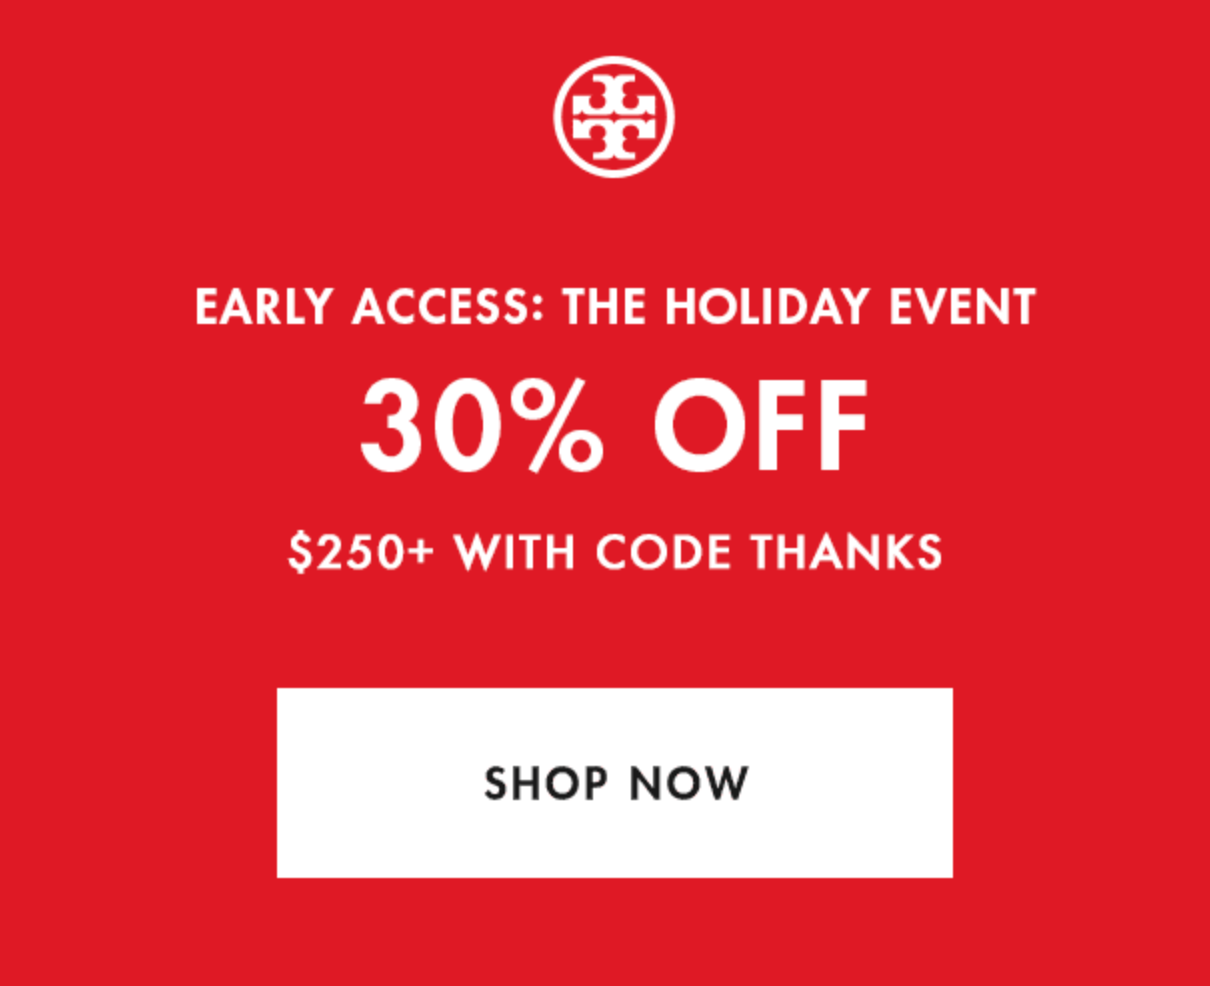 Tory Burch 30% Off Holiday Event 2019 - The Double Take Girls